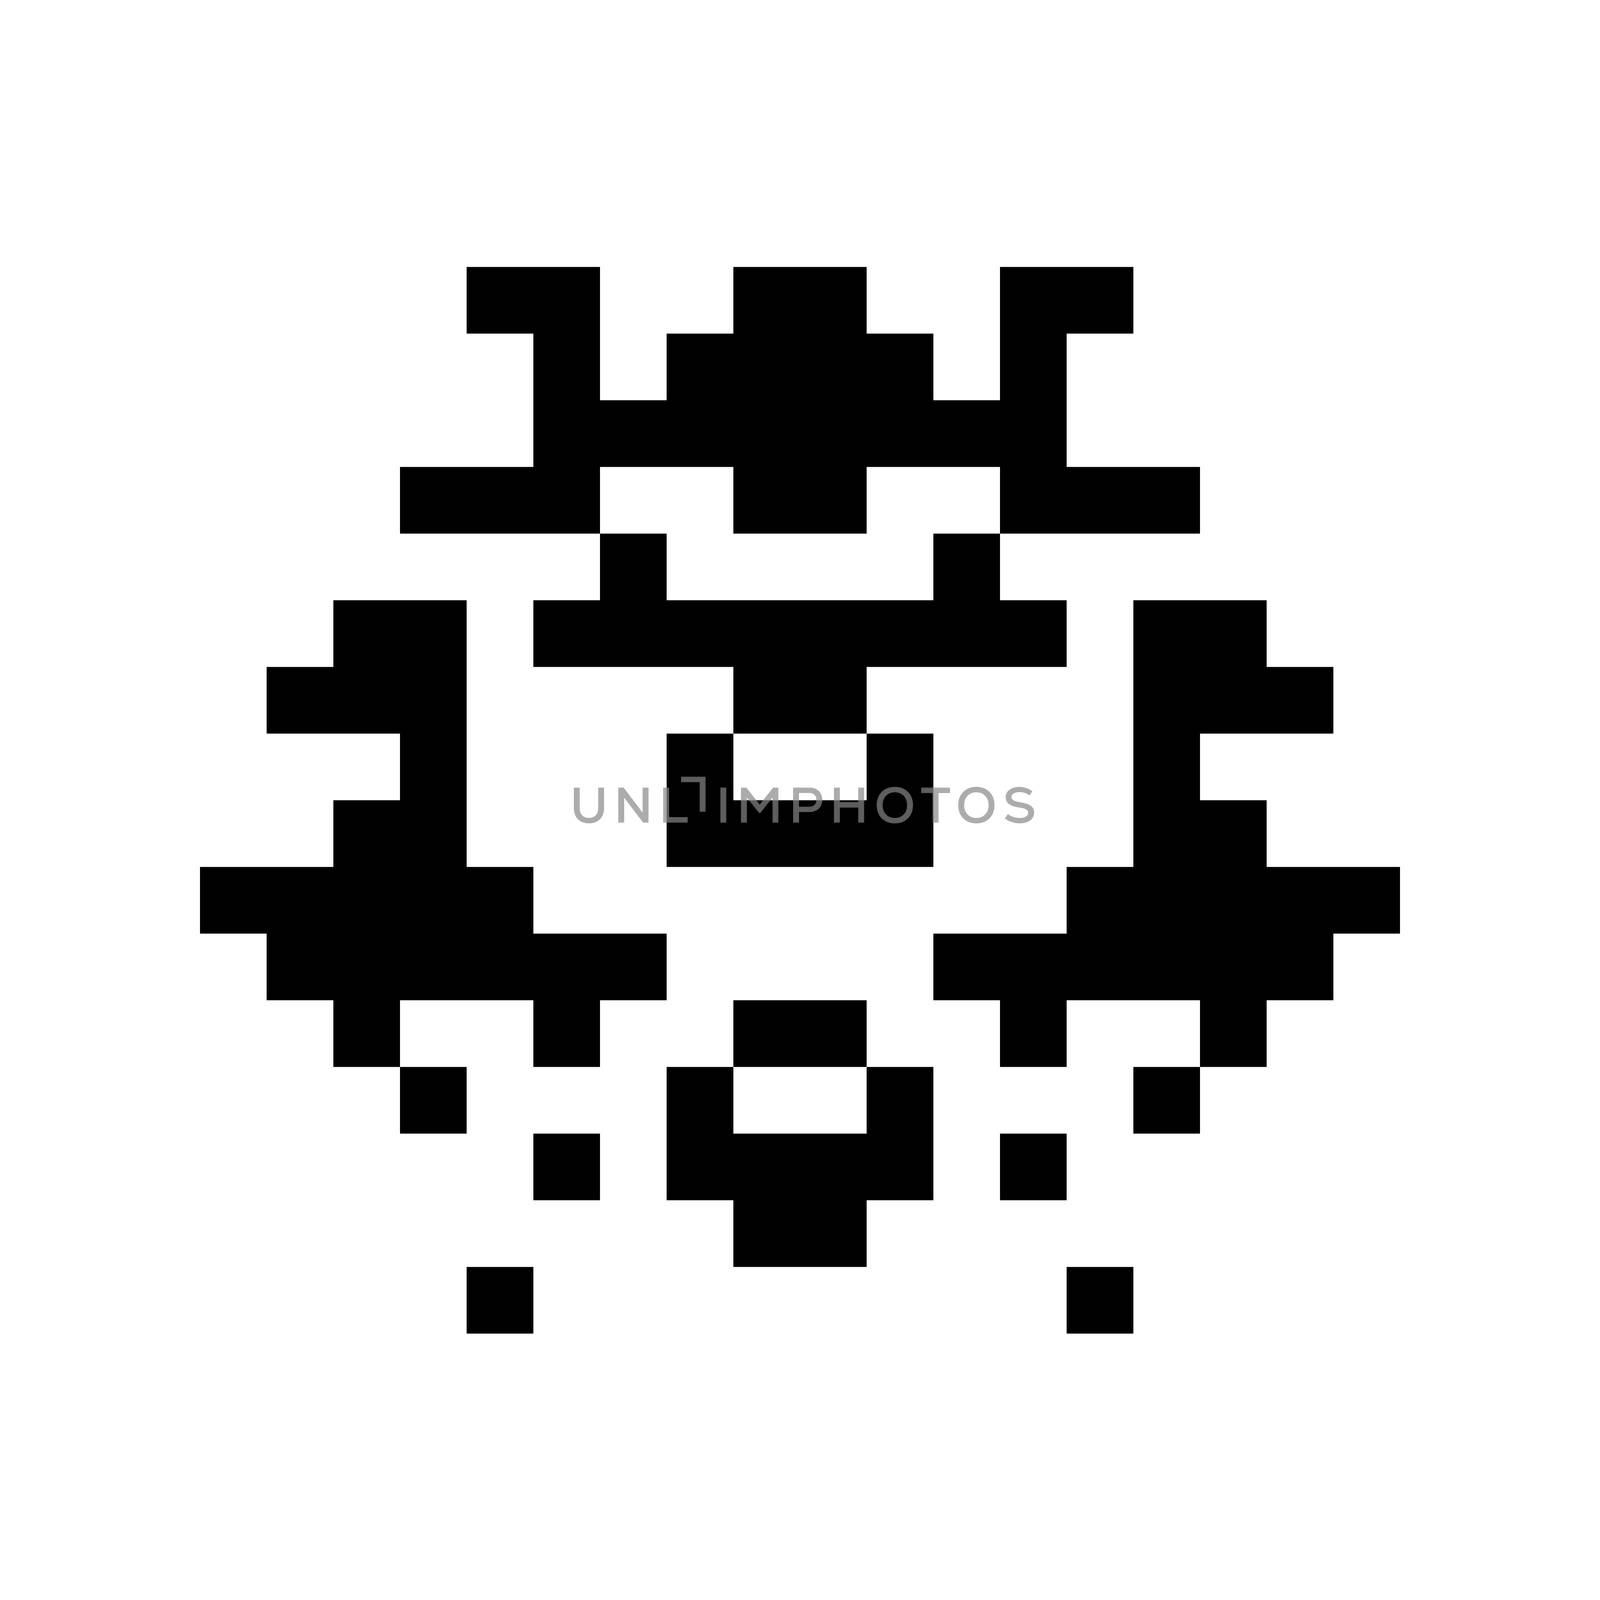 A simple monster pixel face black and white